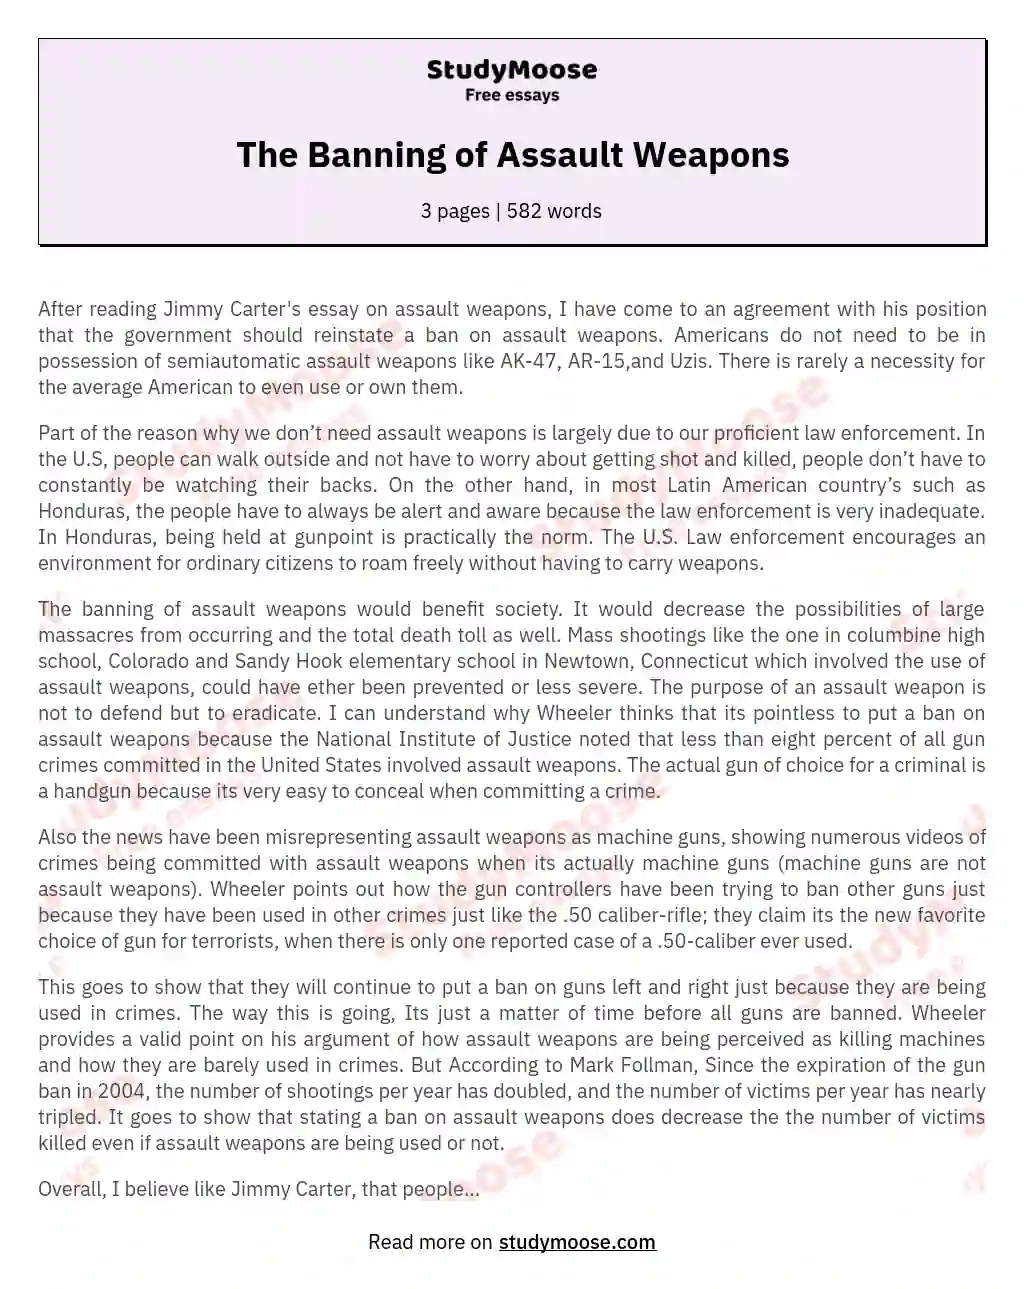 The Banning of Assault Weapons essay